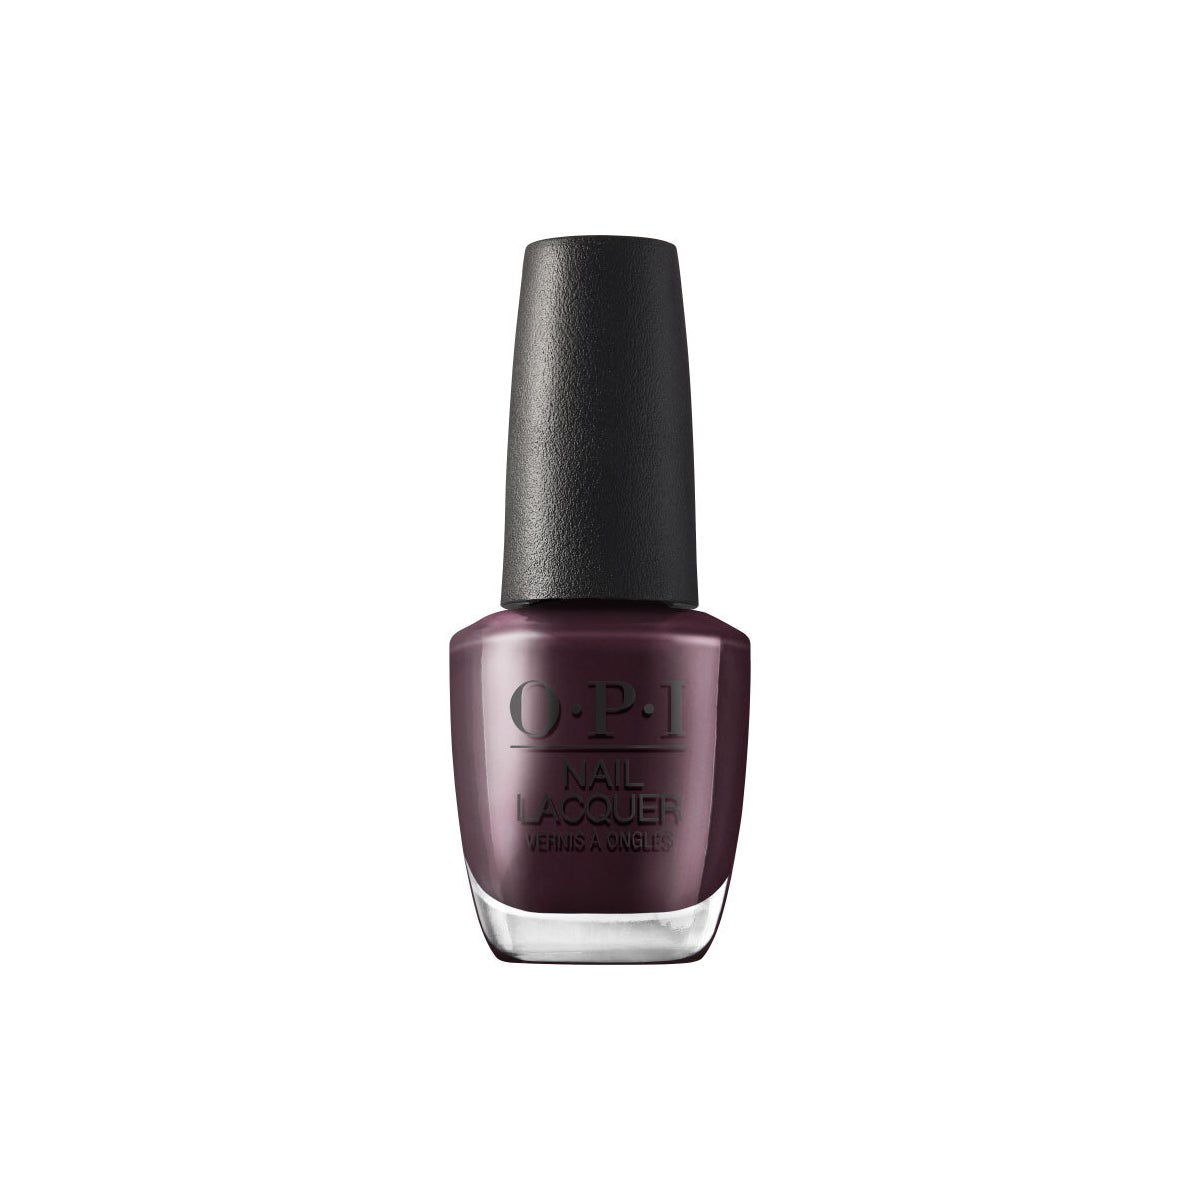 OPI Nail Lacquer - Complimentary Wine MUSE OF MILAN